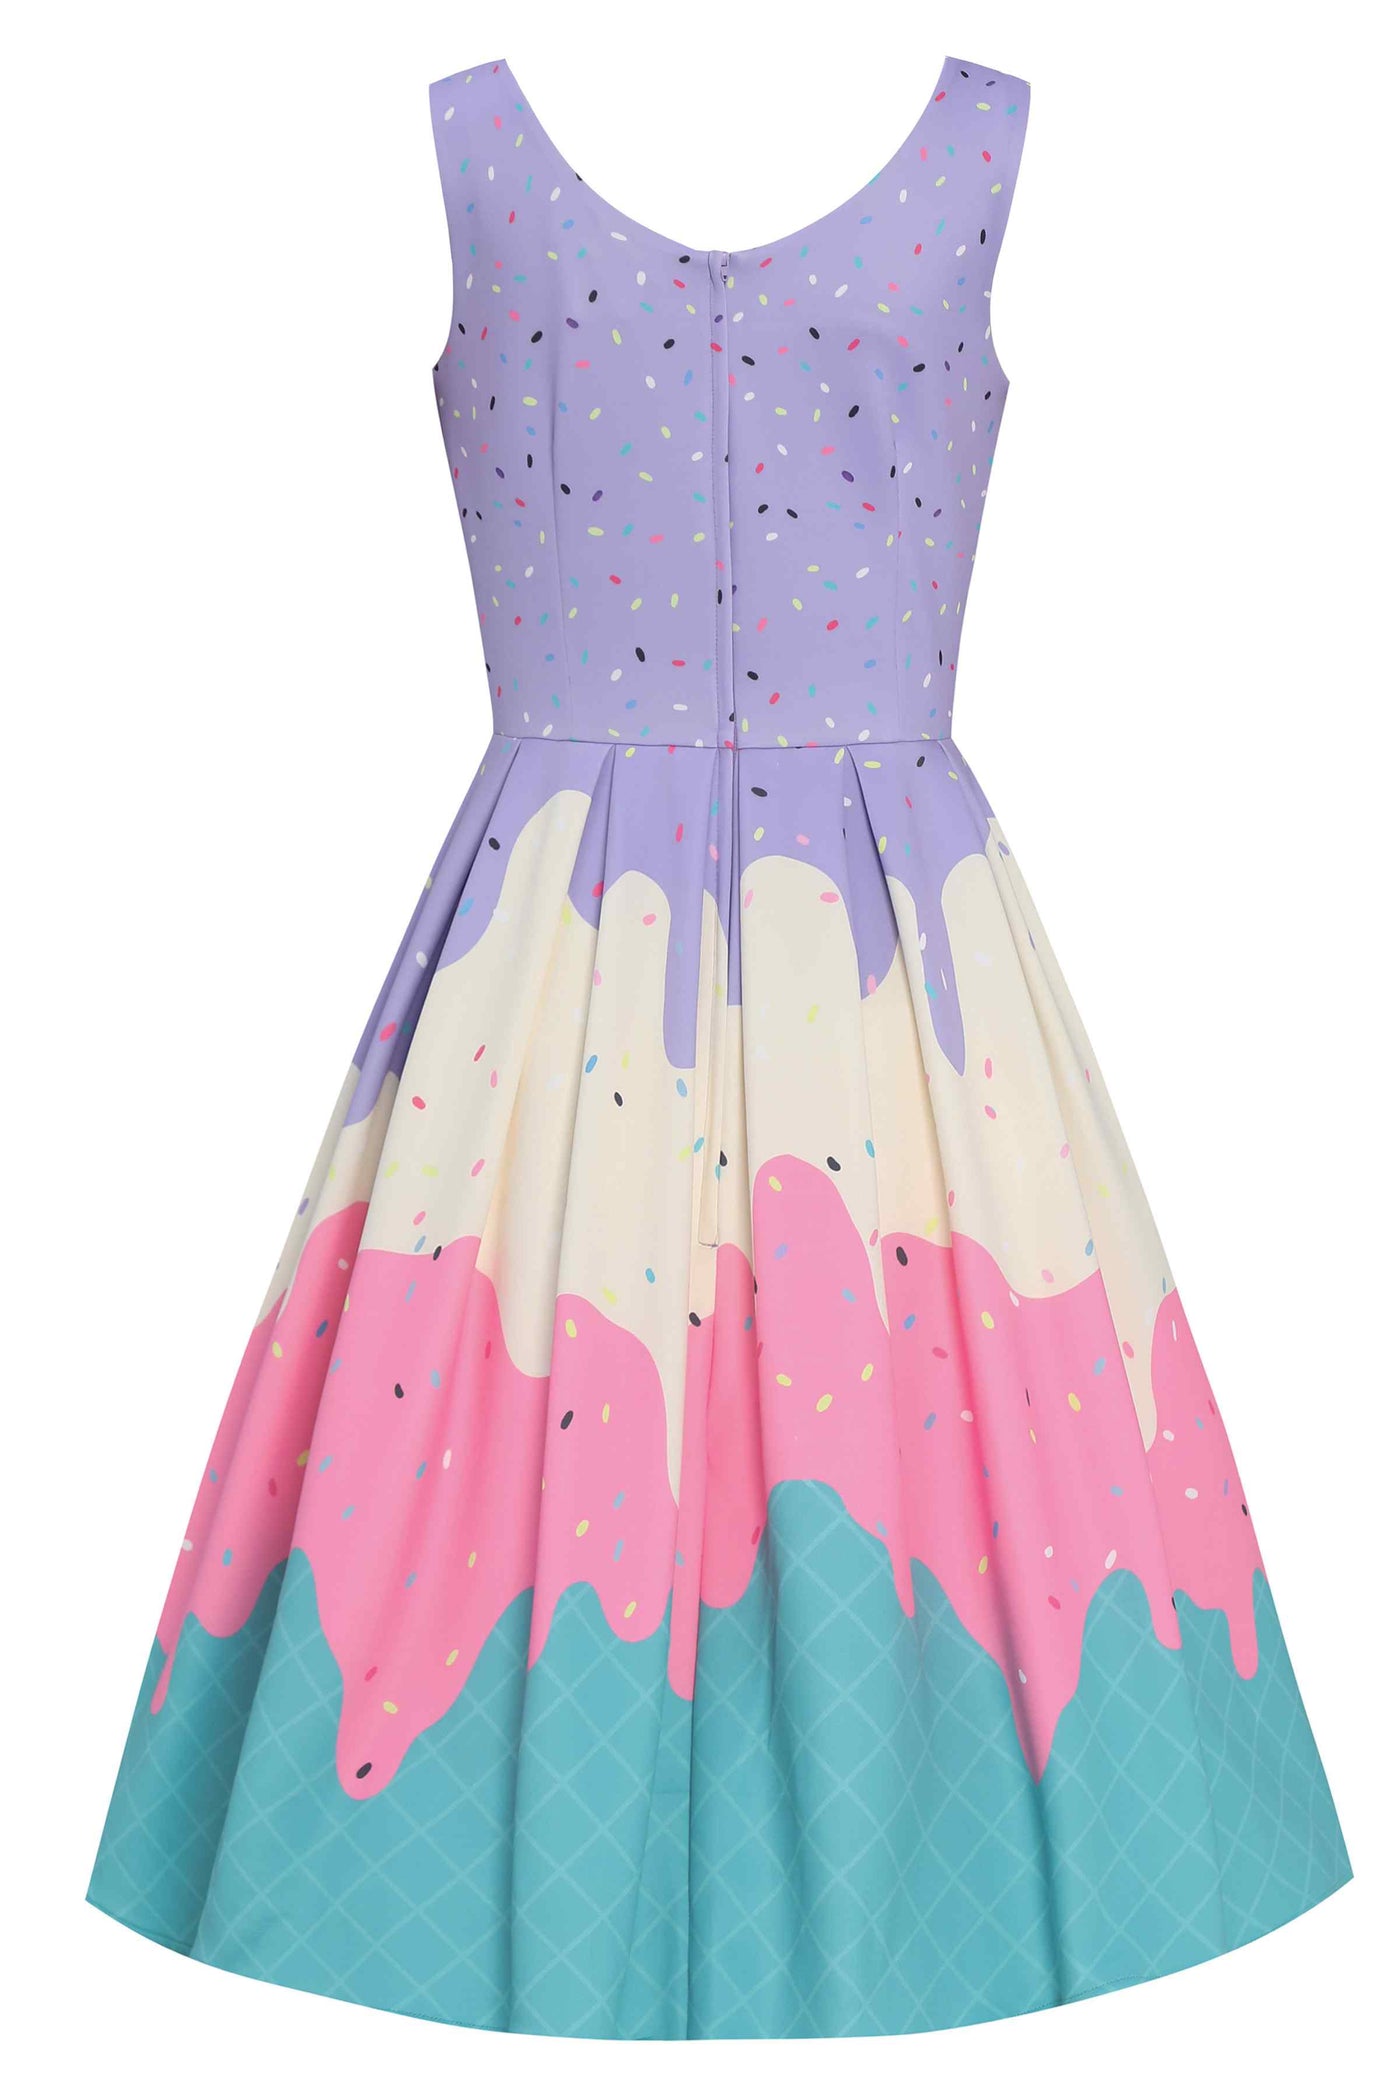 Back view of Summer Sprinkles Ice Cream Cone Swing Dress